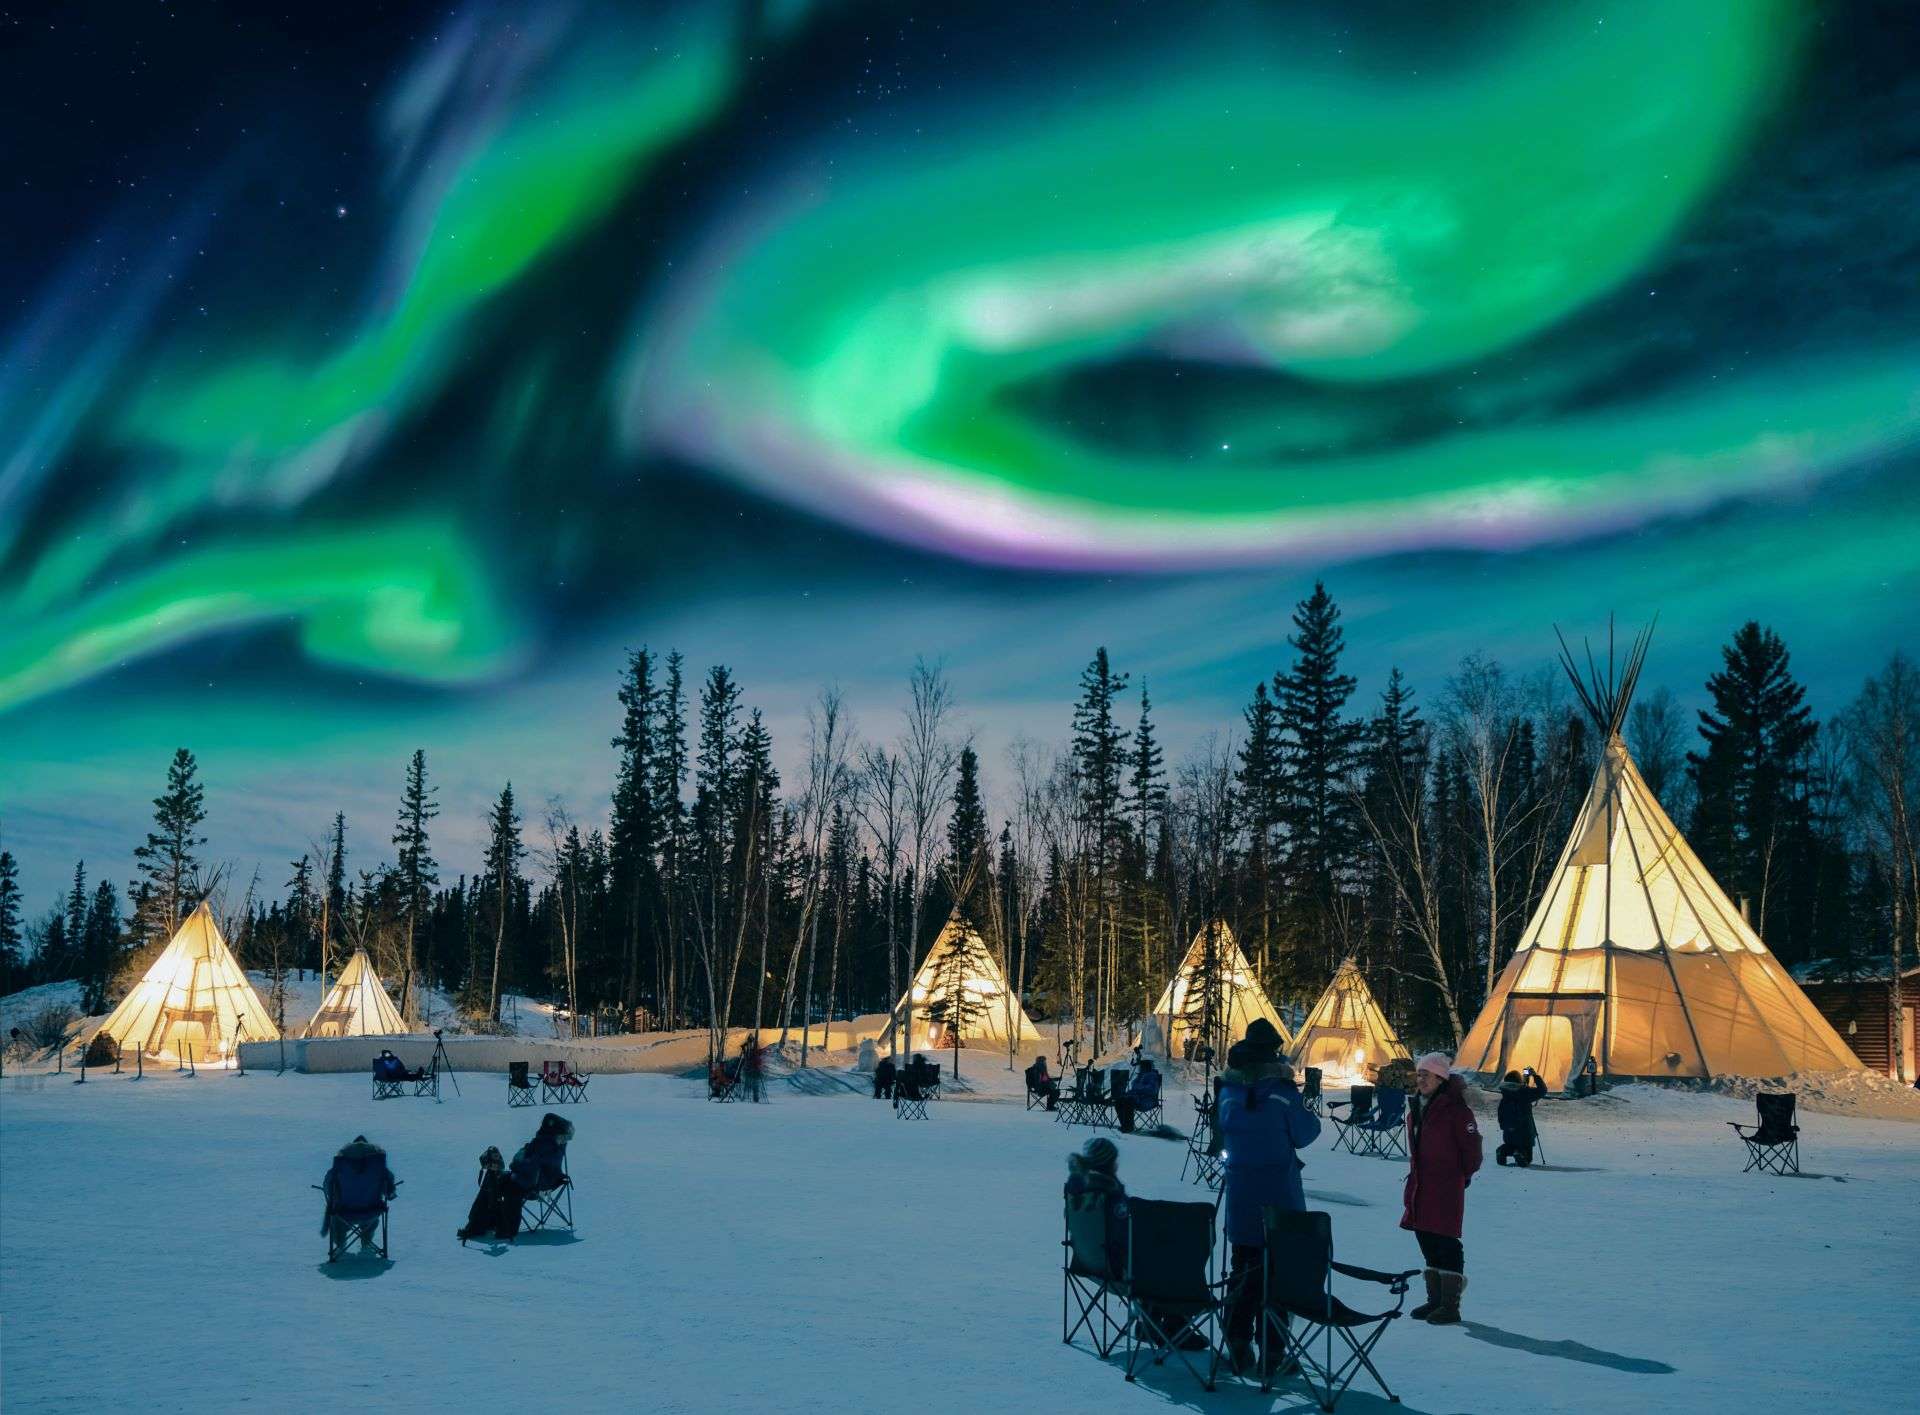 People camping outside in order to observe the Northern lights.